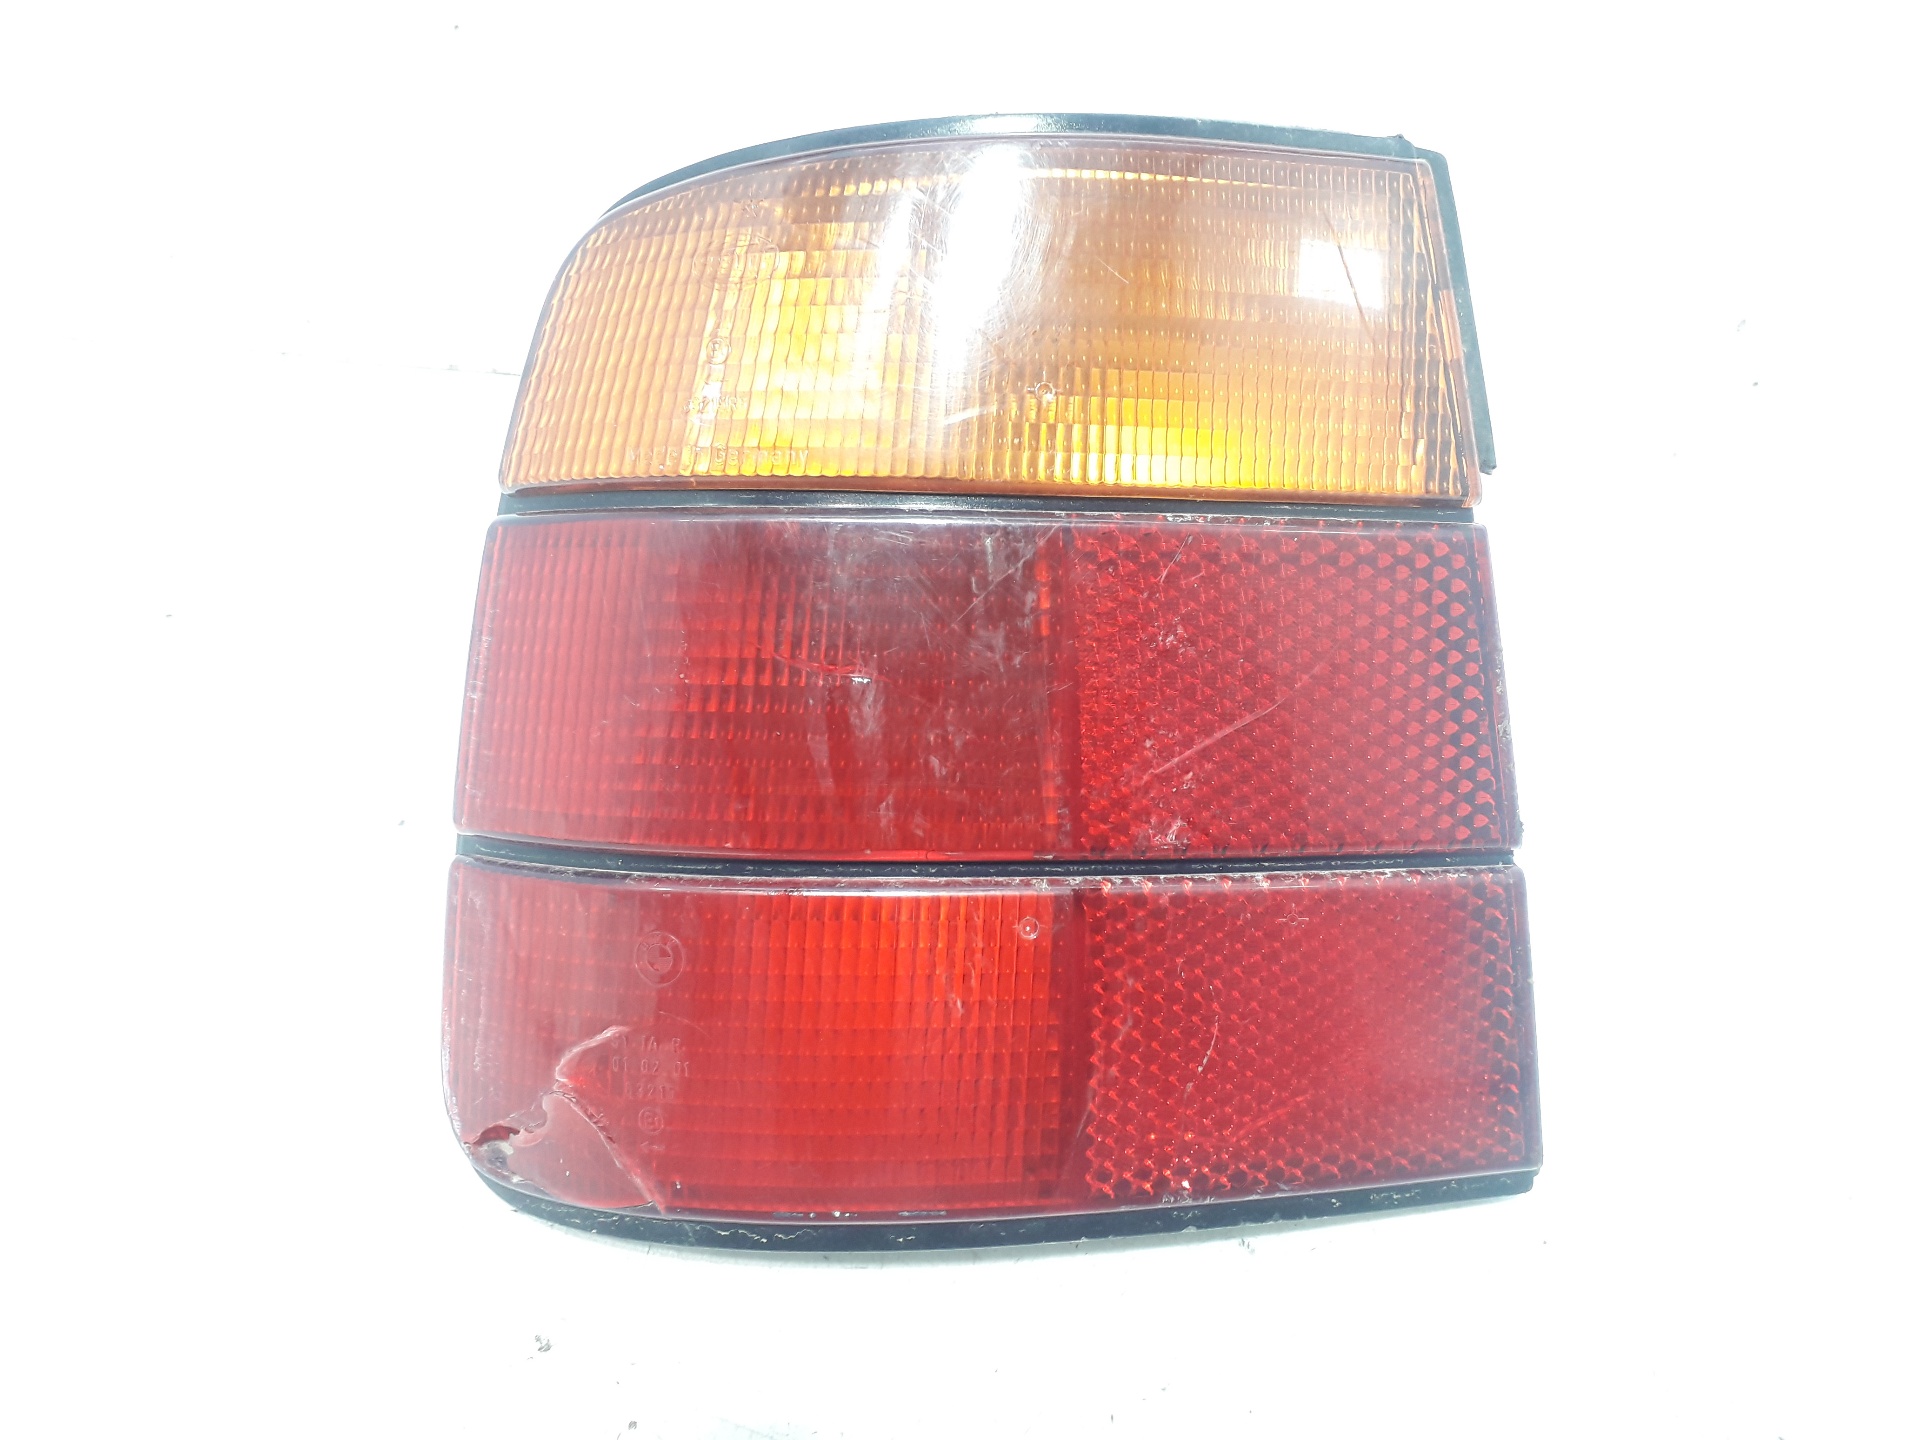 BMW 5 Series E34 (1988-1996) Rear Right Taillight Lamp 63211384010 22017305